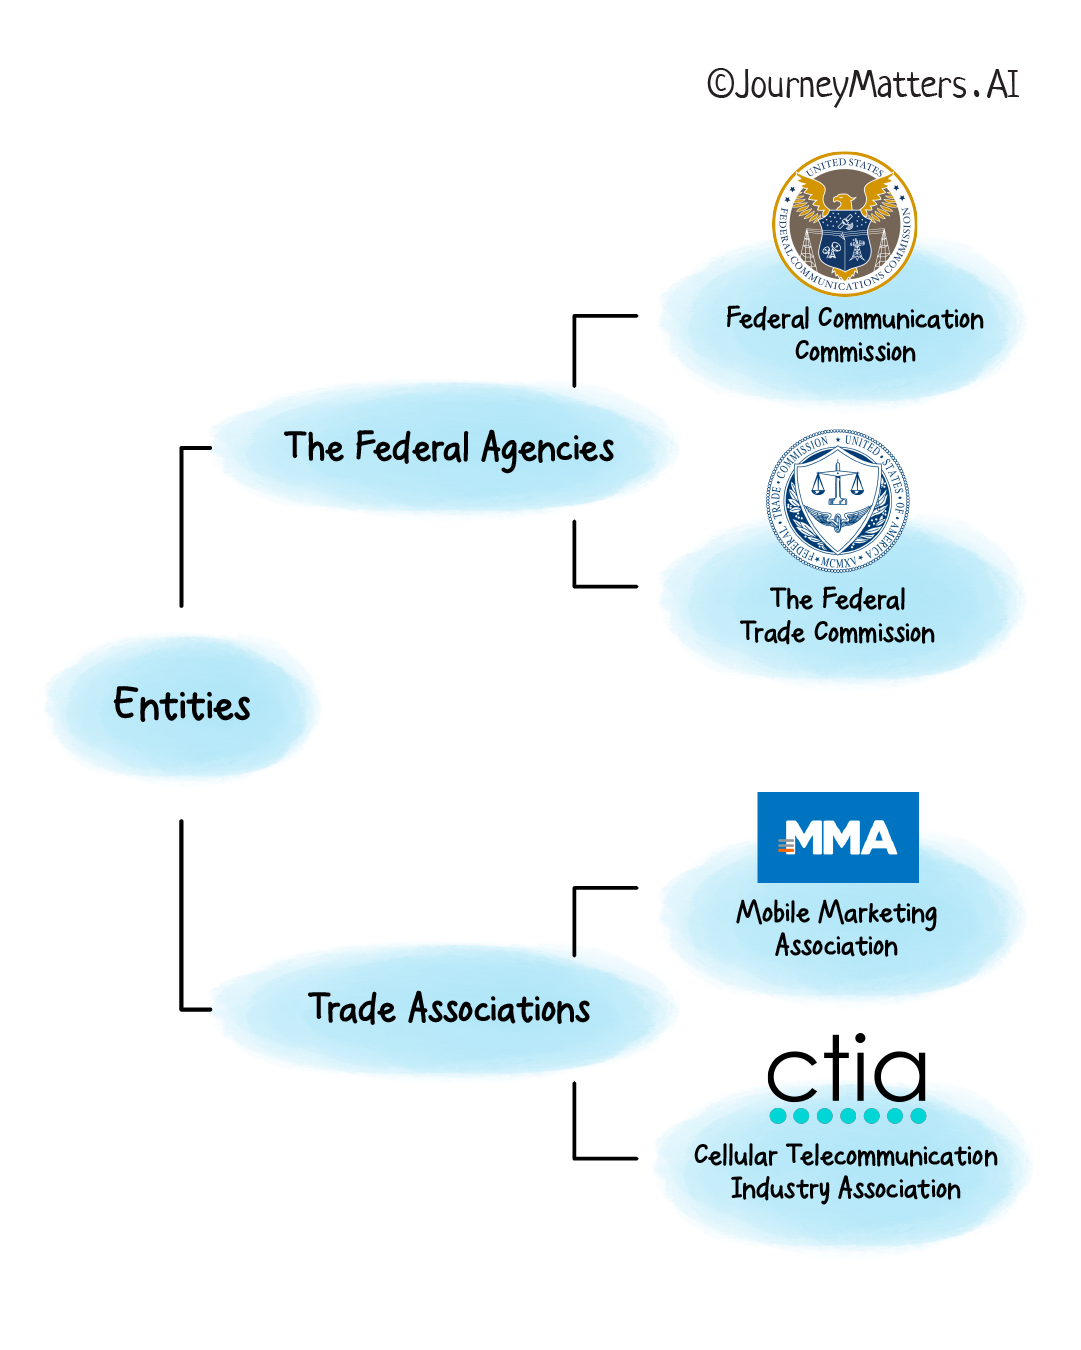 SMS marketing regulatory authorities in the US: the federal agencies and the trade associations.